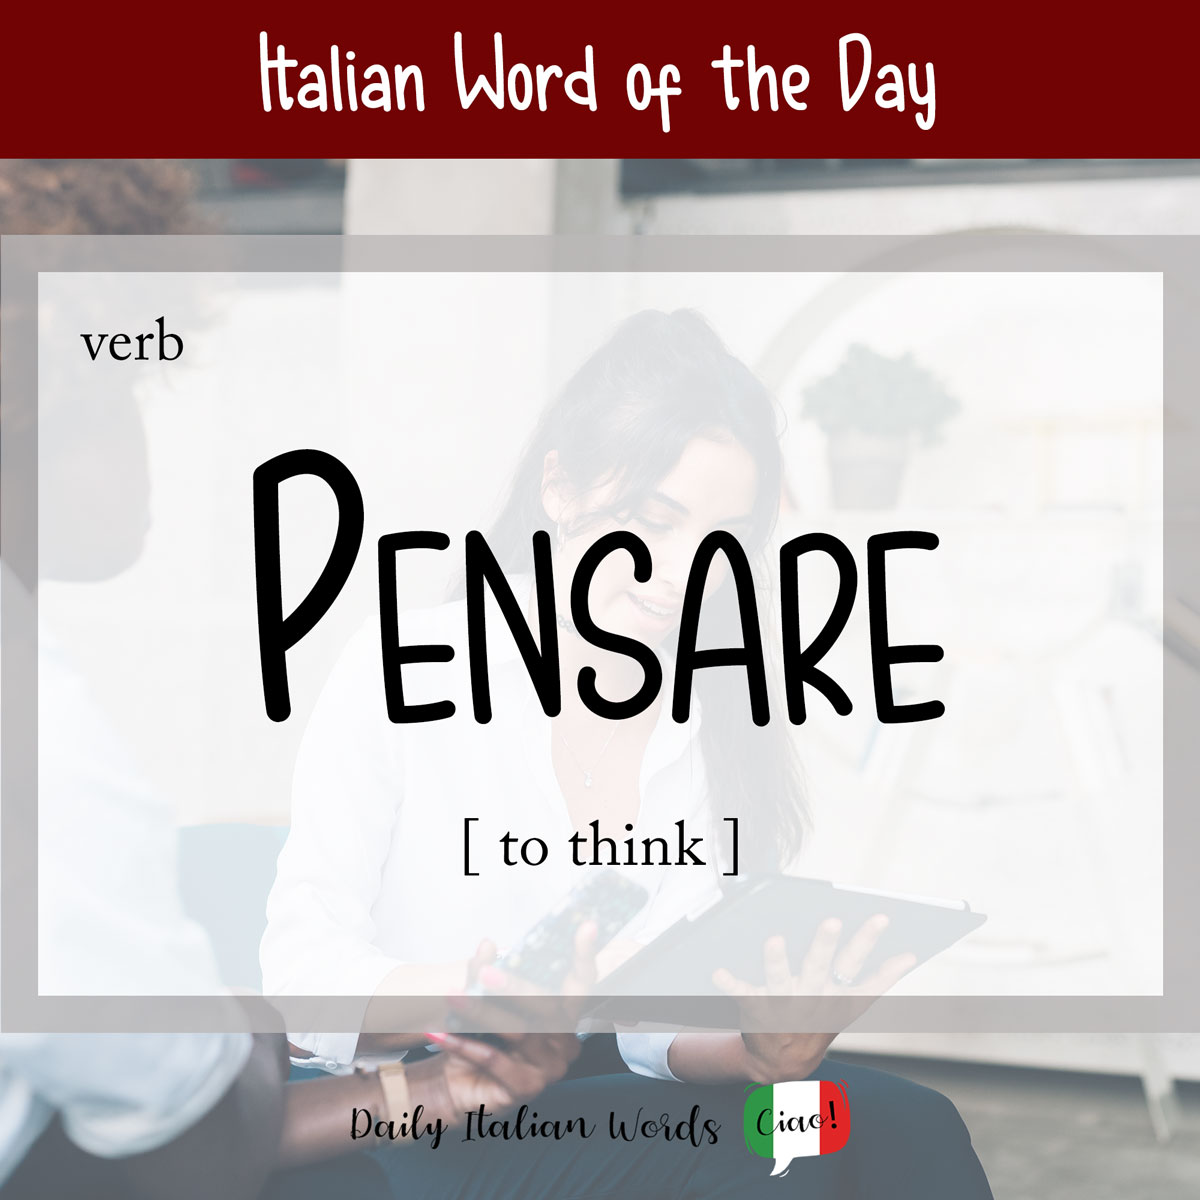 Italian word of the day: Pensare (think)